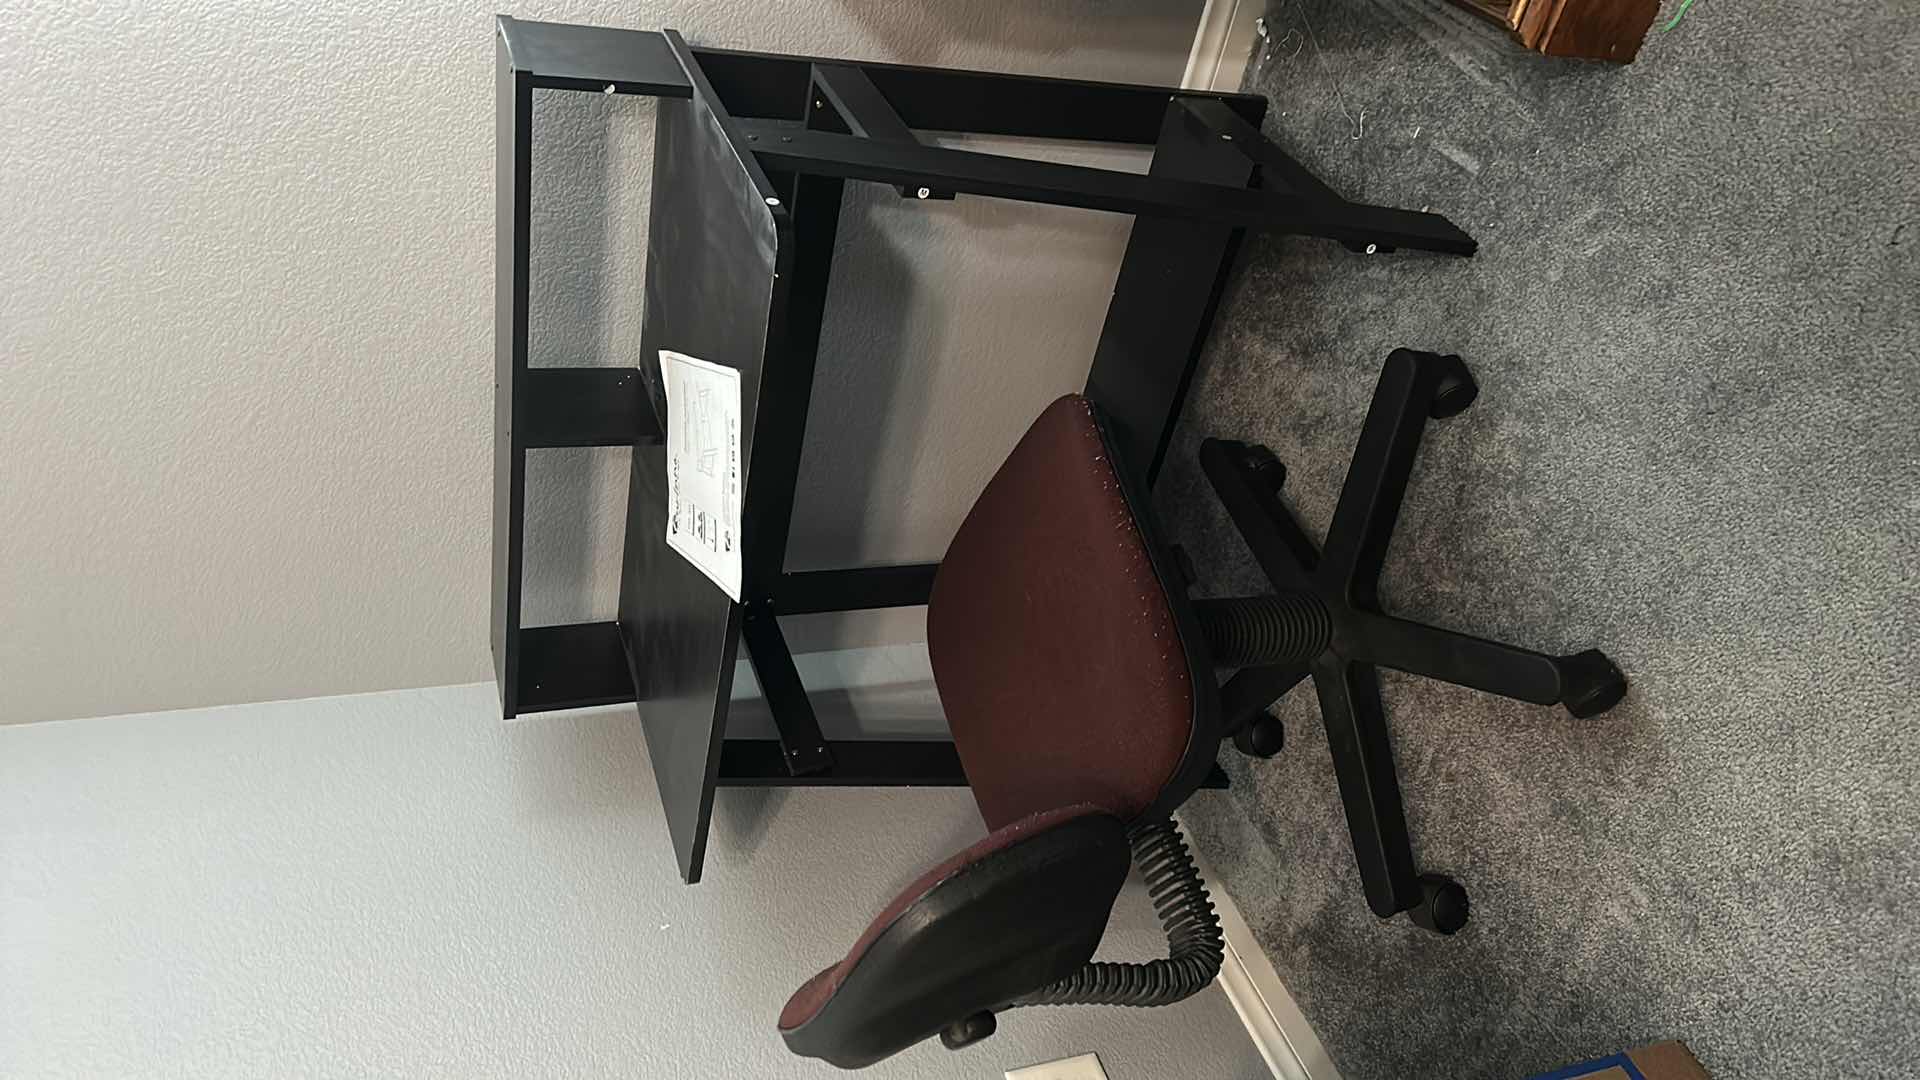 Photo 4 of FURINNO SMALL “A” FRAMED COMPUTER DESK AND CHAIR 32” x 18” x H35.5”